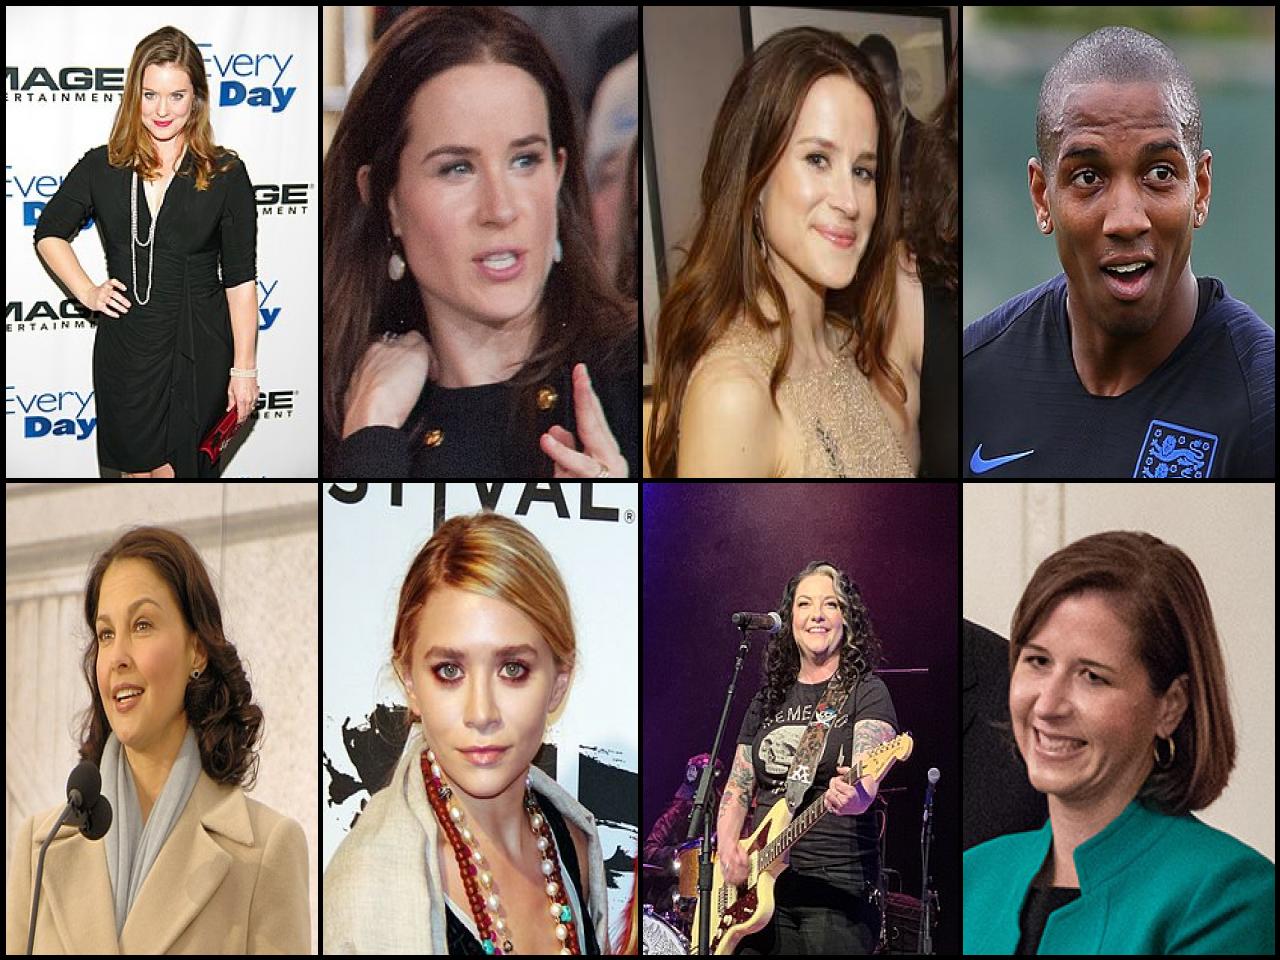 List of Famous people named <b>Ashley</b>